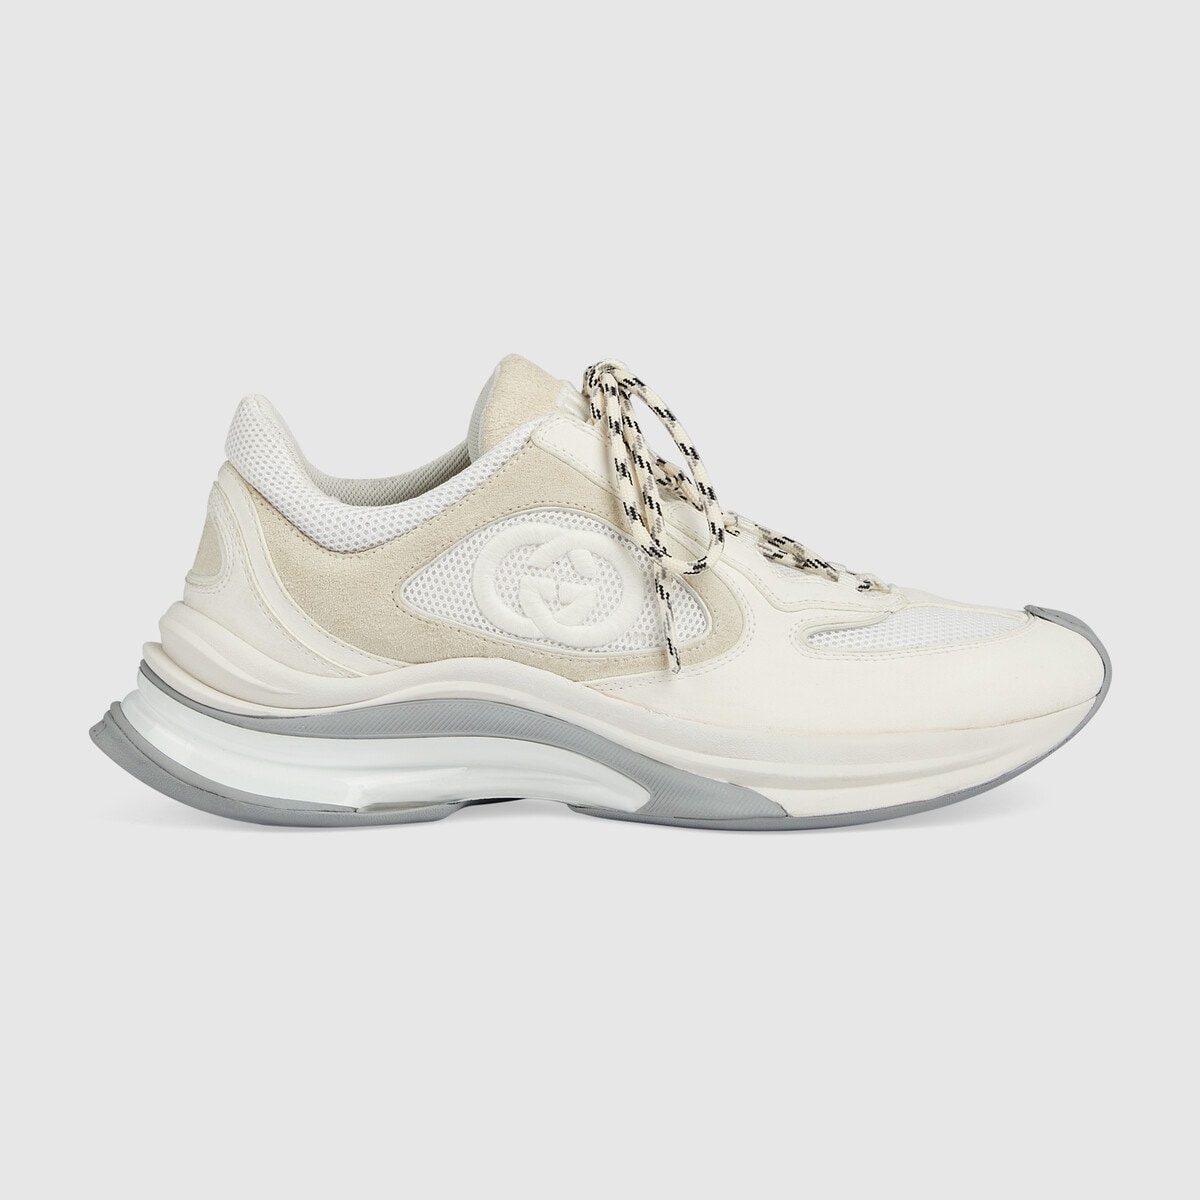 Gucci Women's GG Embossed Leather Sneakers - White - Size 4.5